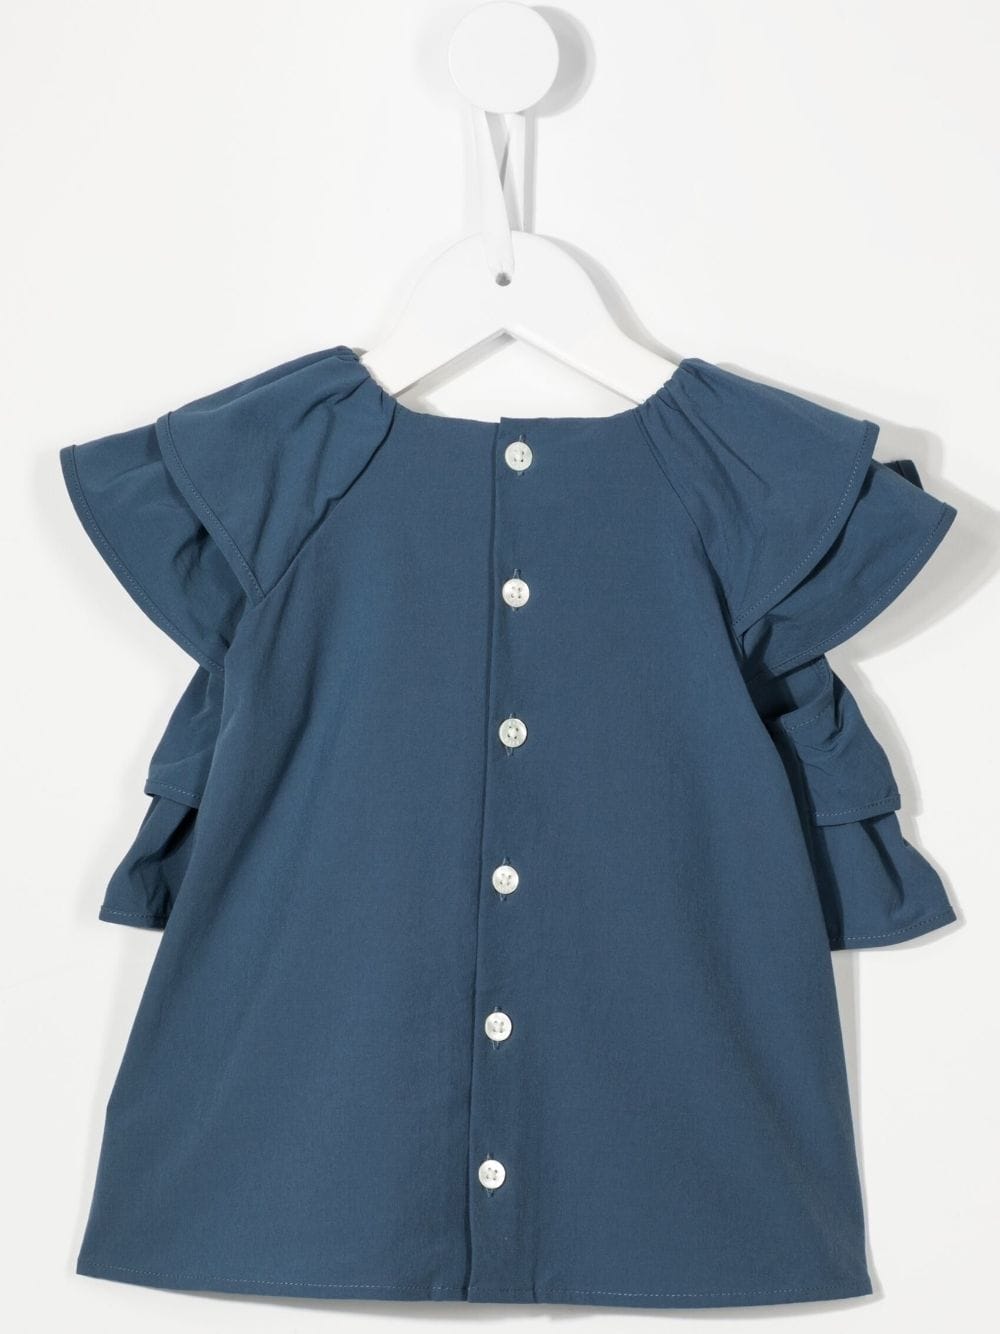 Fith Blouse met ruche afwerking - Blauw